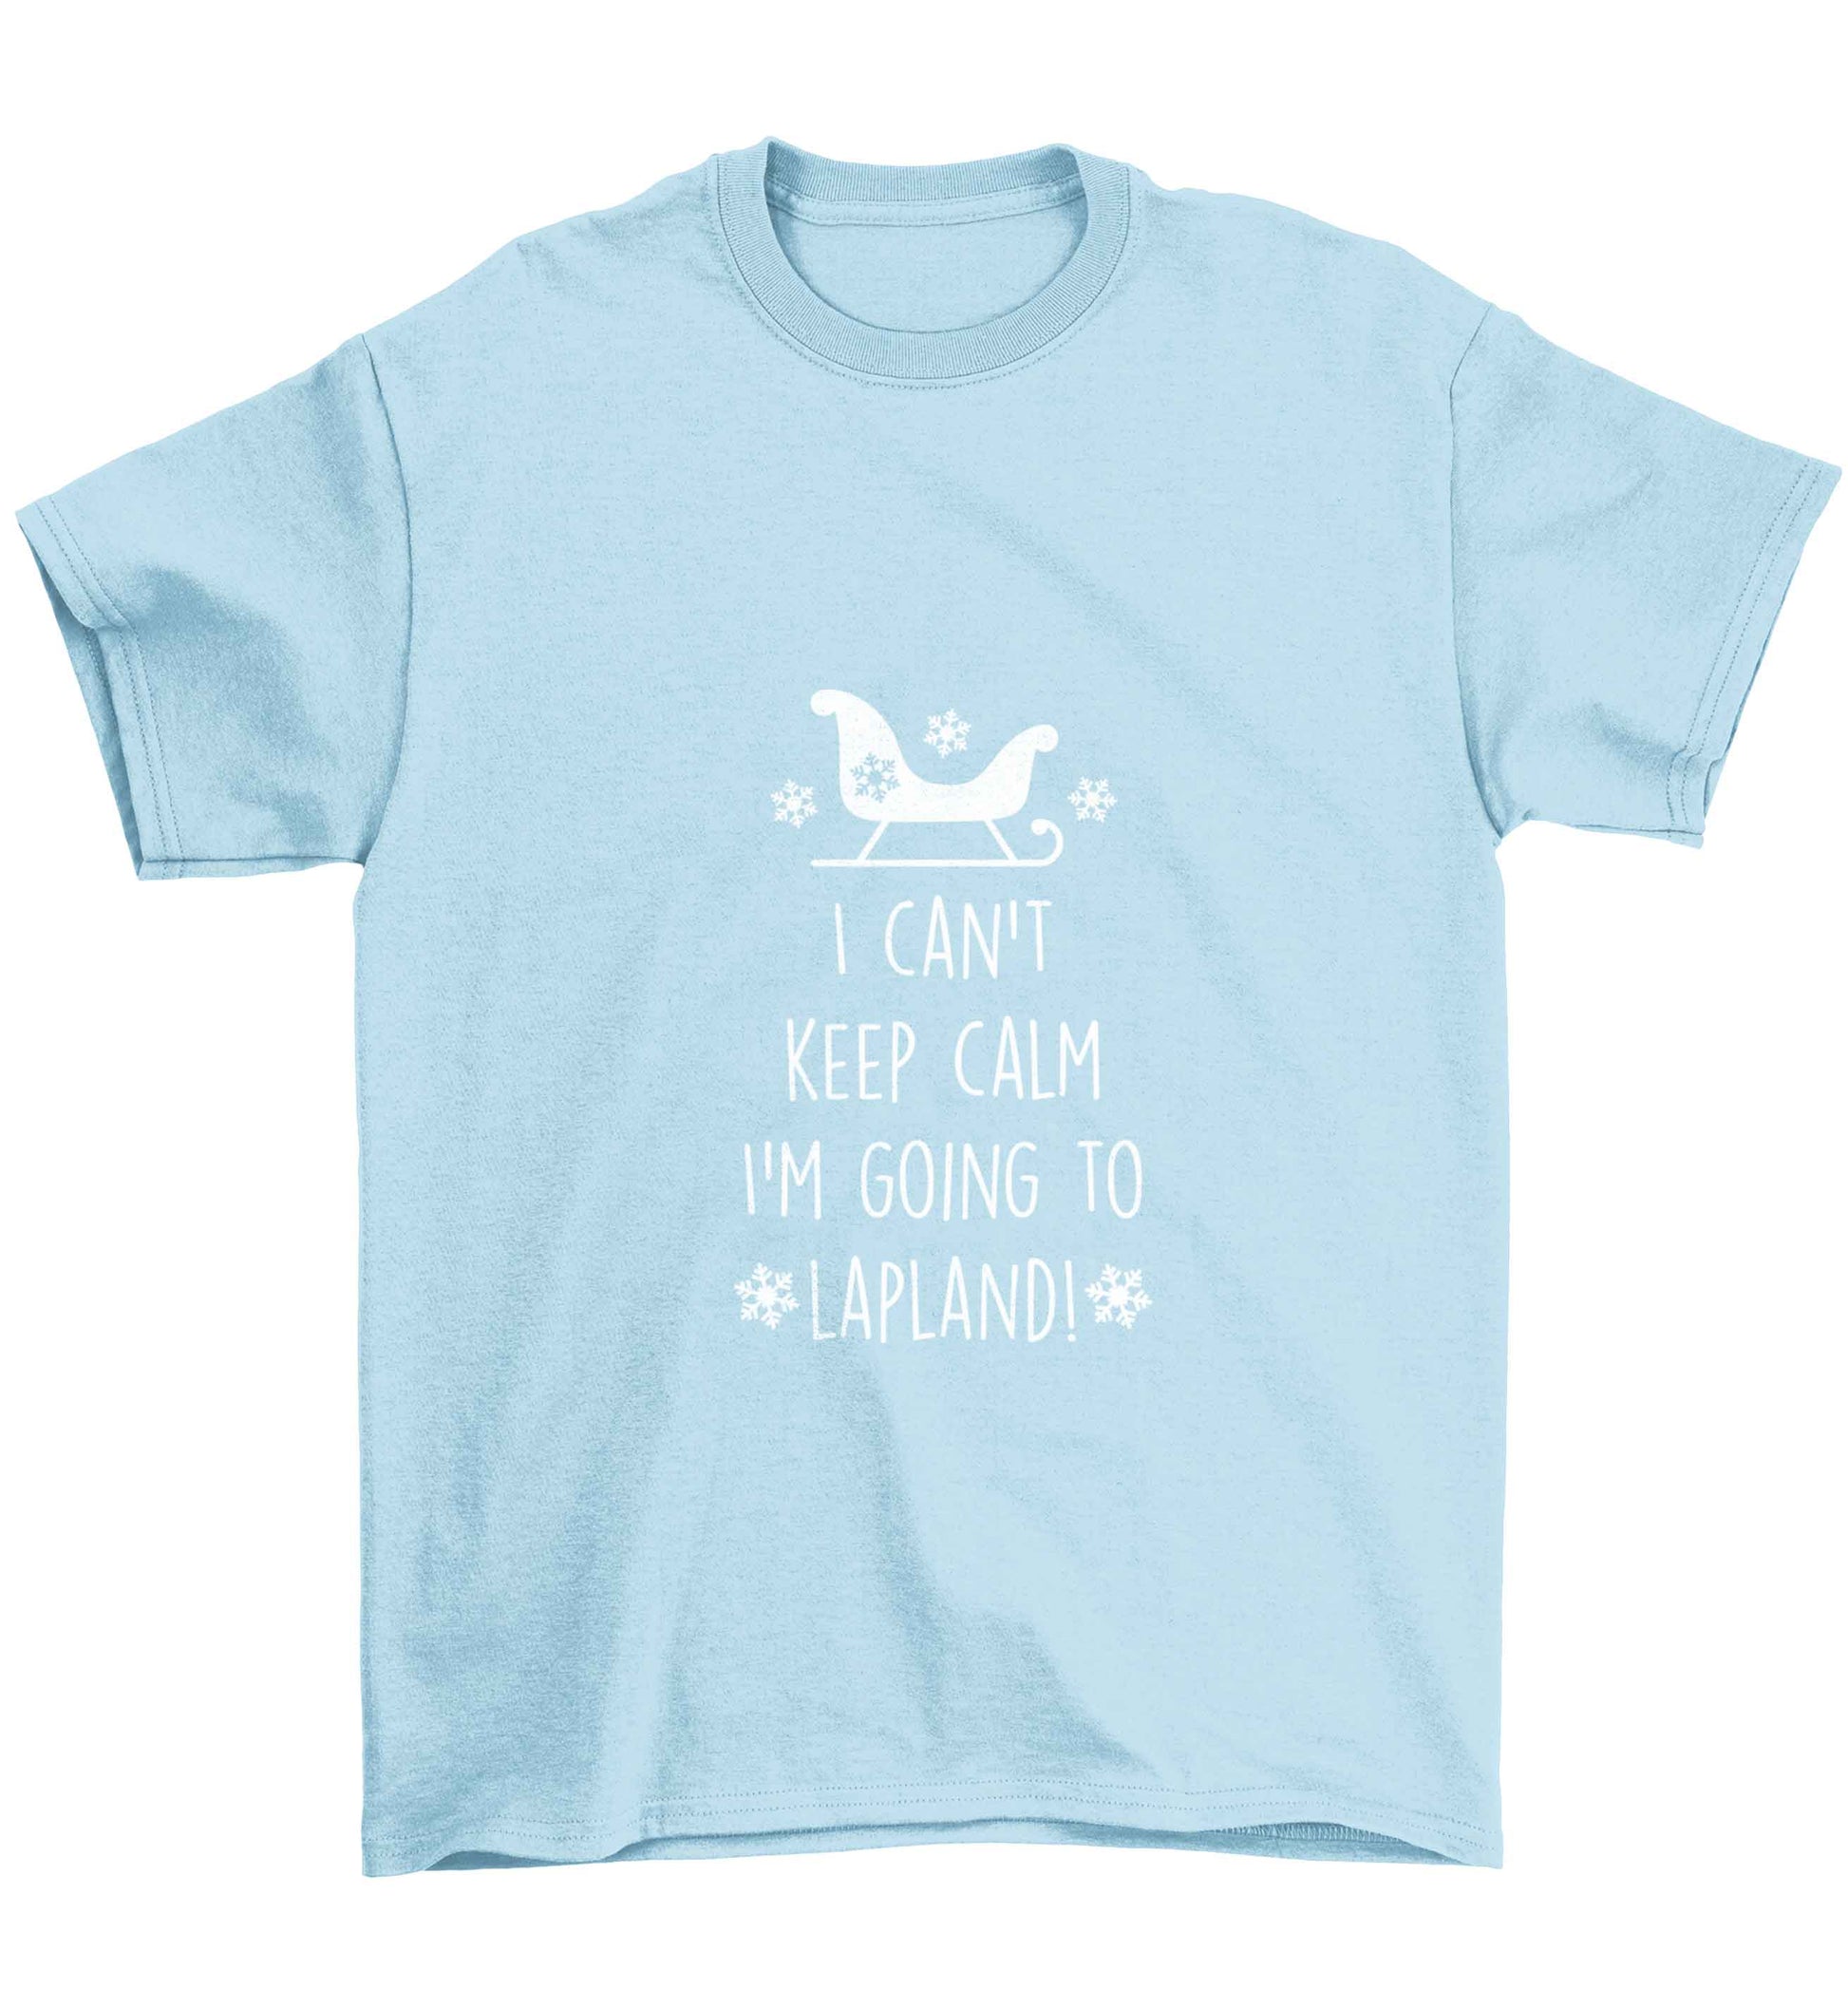 I can't keep calm I'm going to Lapland Children's light blue Tshirt 12-13 Years